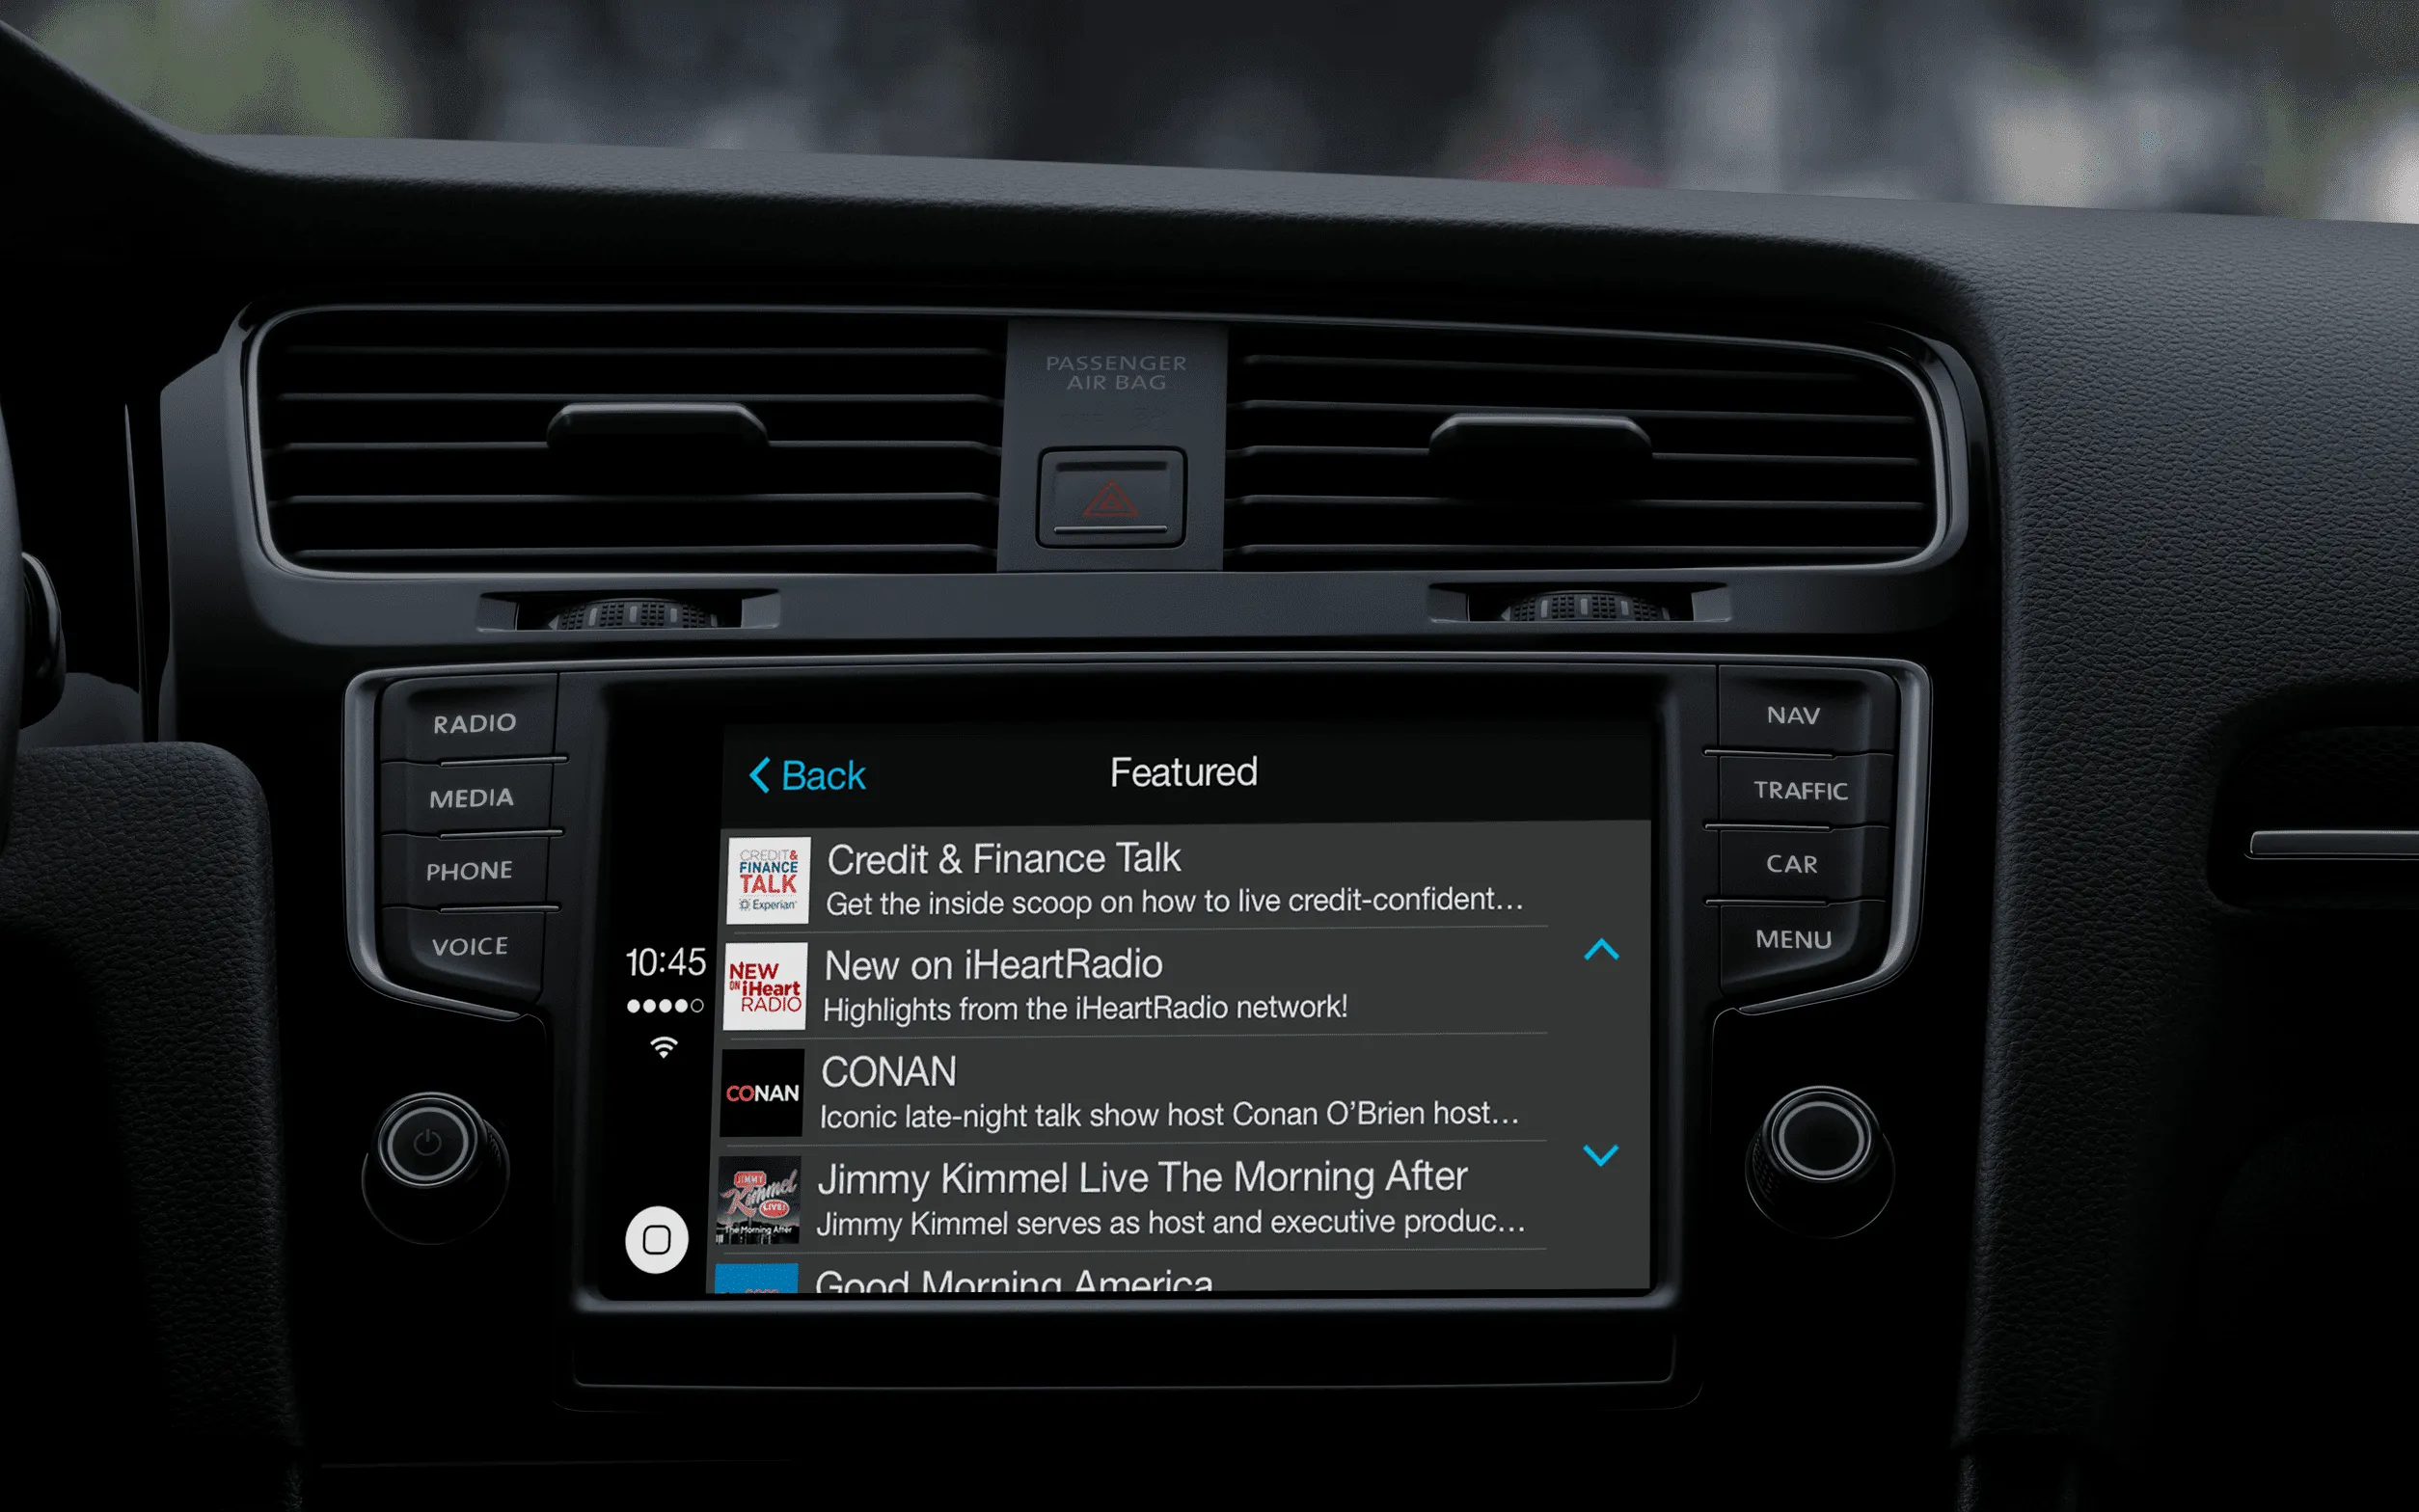 Apps supported by apple CarPlay: iHeartRadio